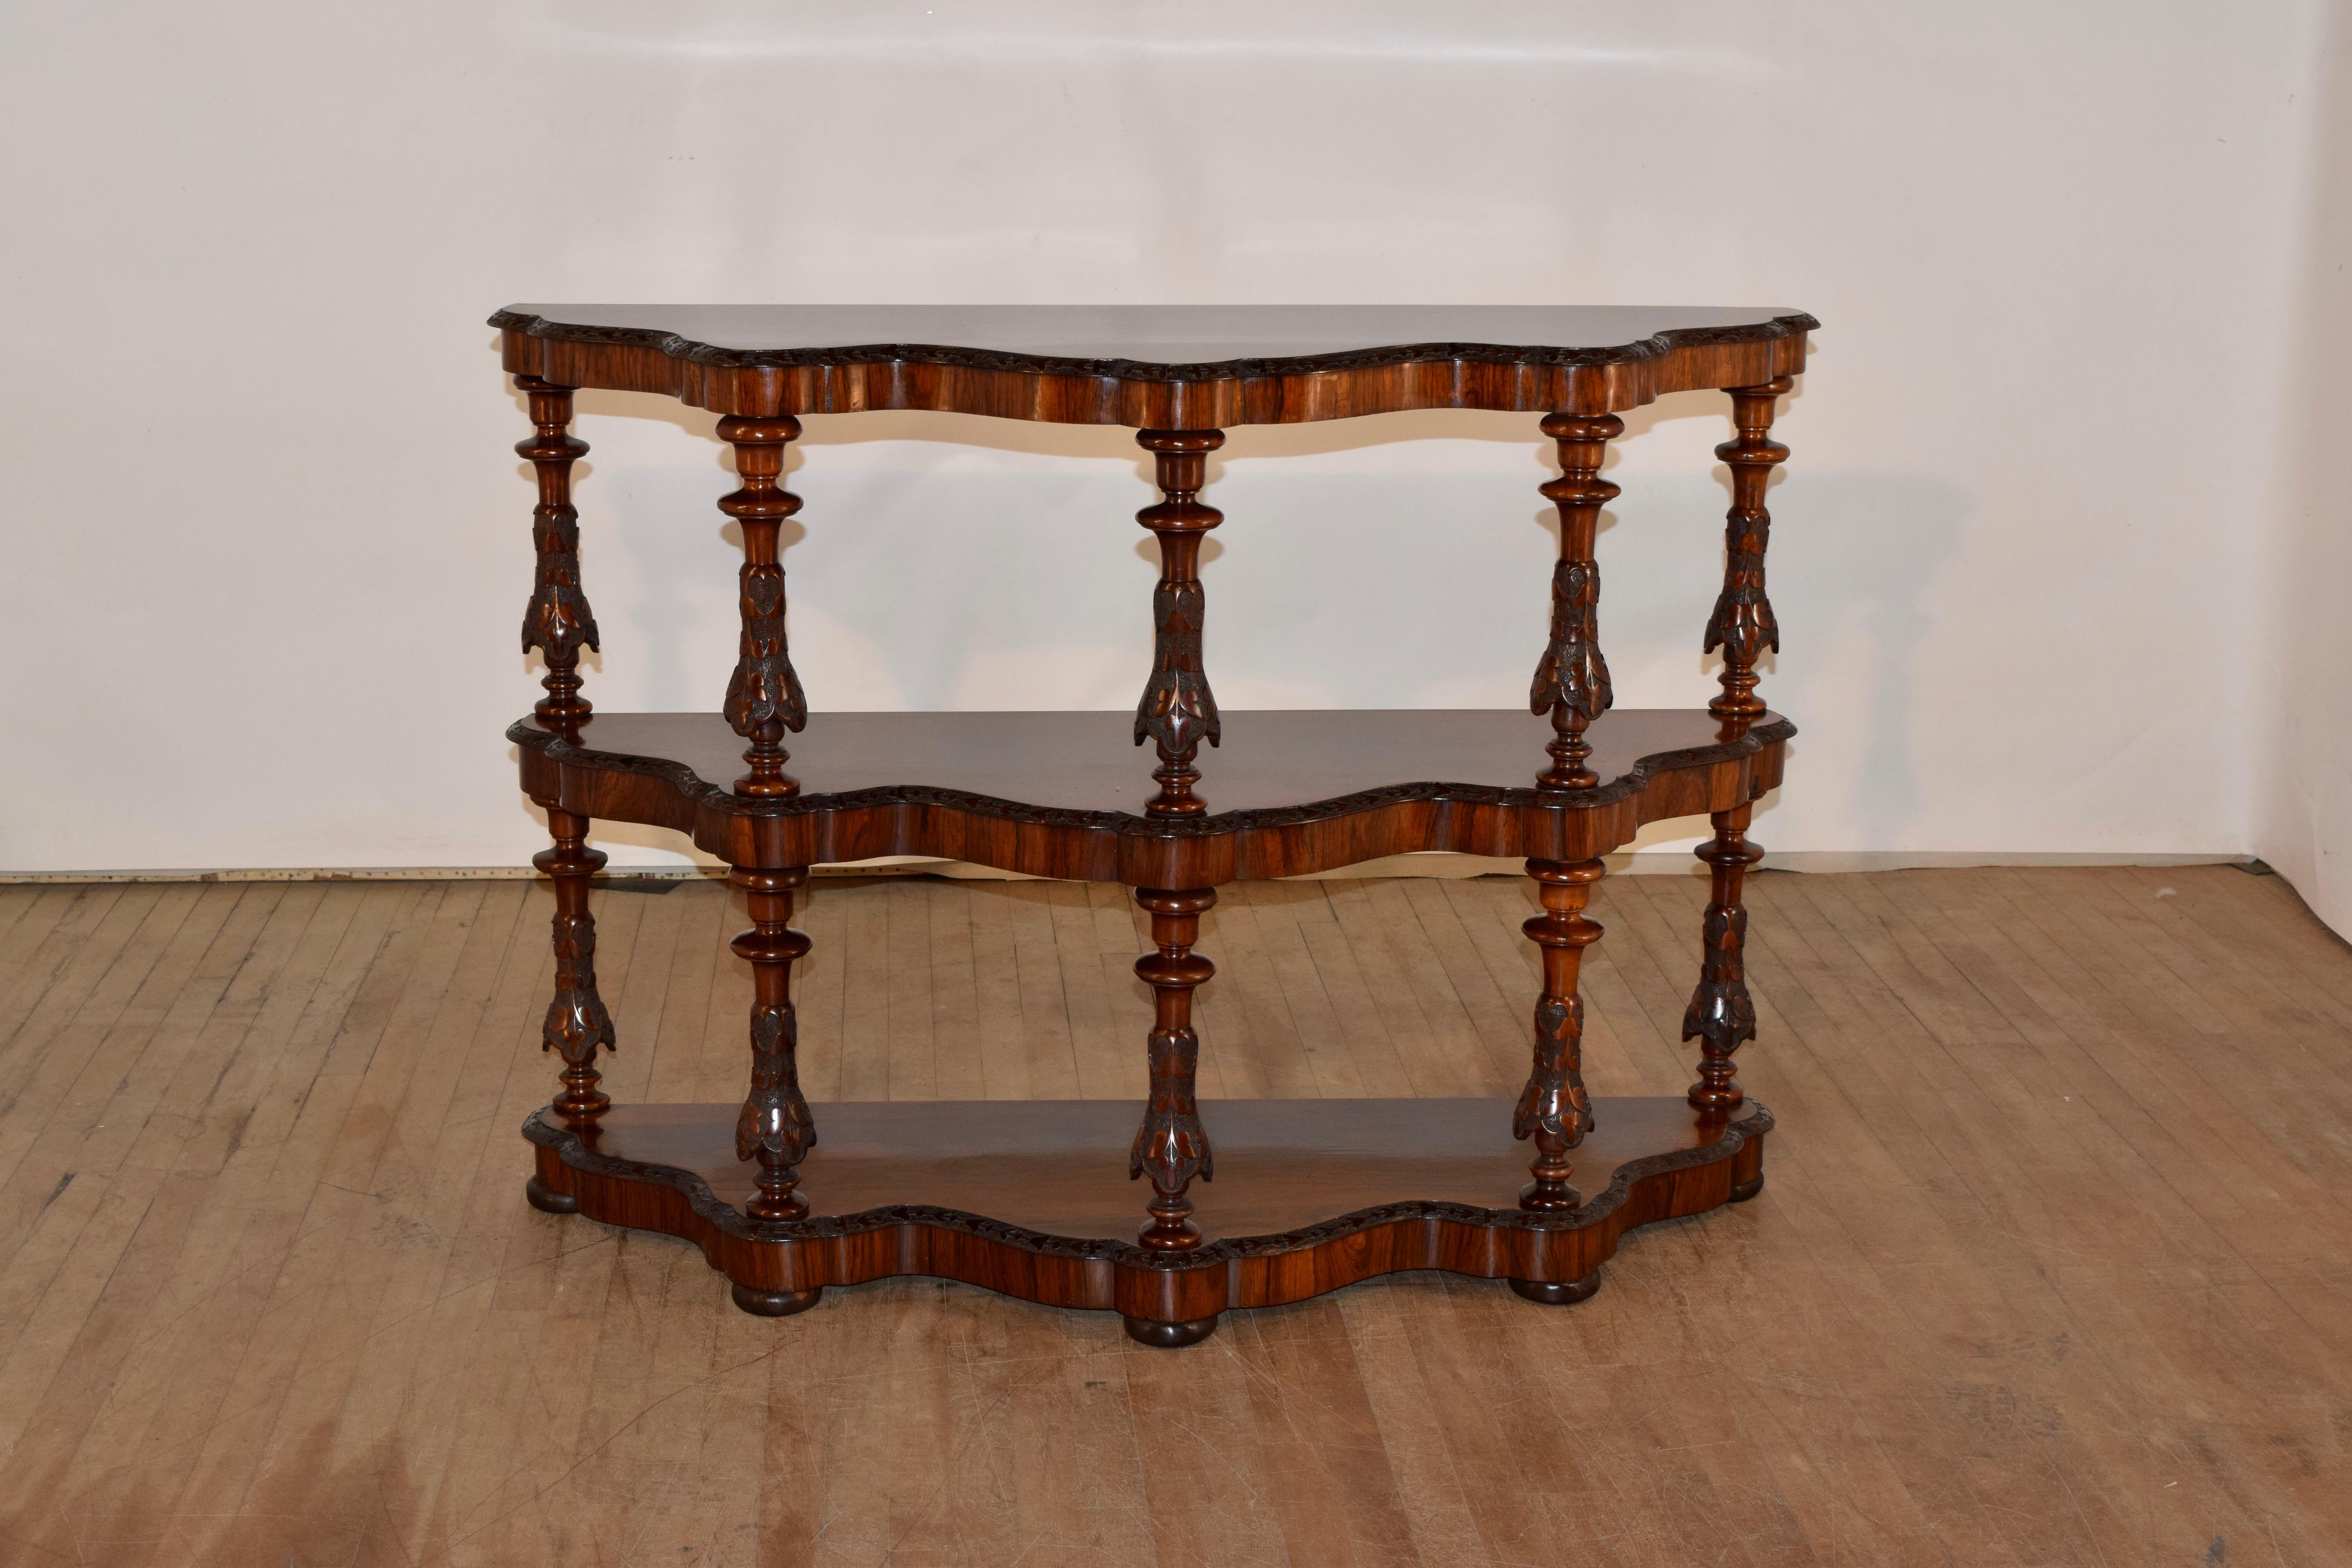 19th century English rosewood shelf from England. This is an exquisite shelf with wonderfully grained wood. The shelves have scalloped fronts and the edges are beveled and carved decorated. There are also banded aprons below the shelves and the